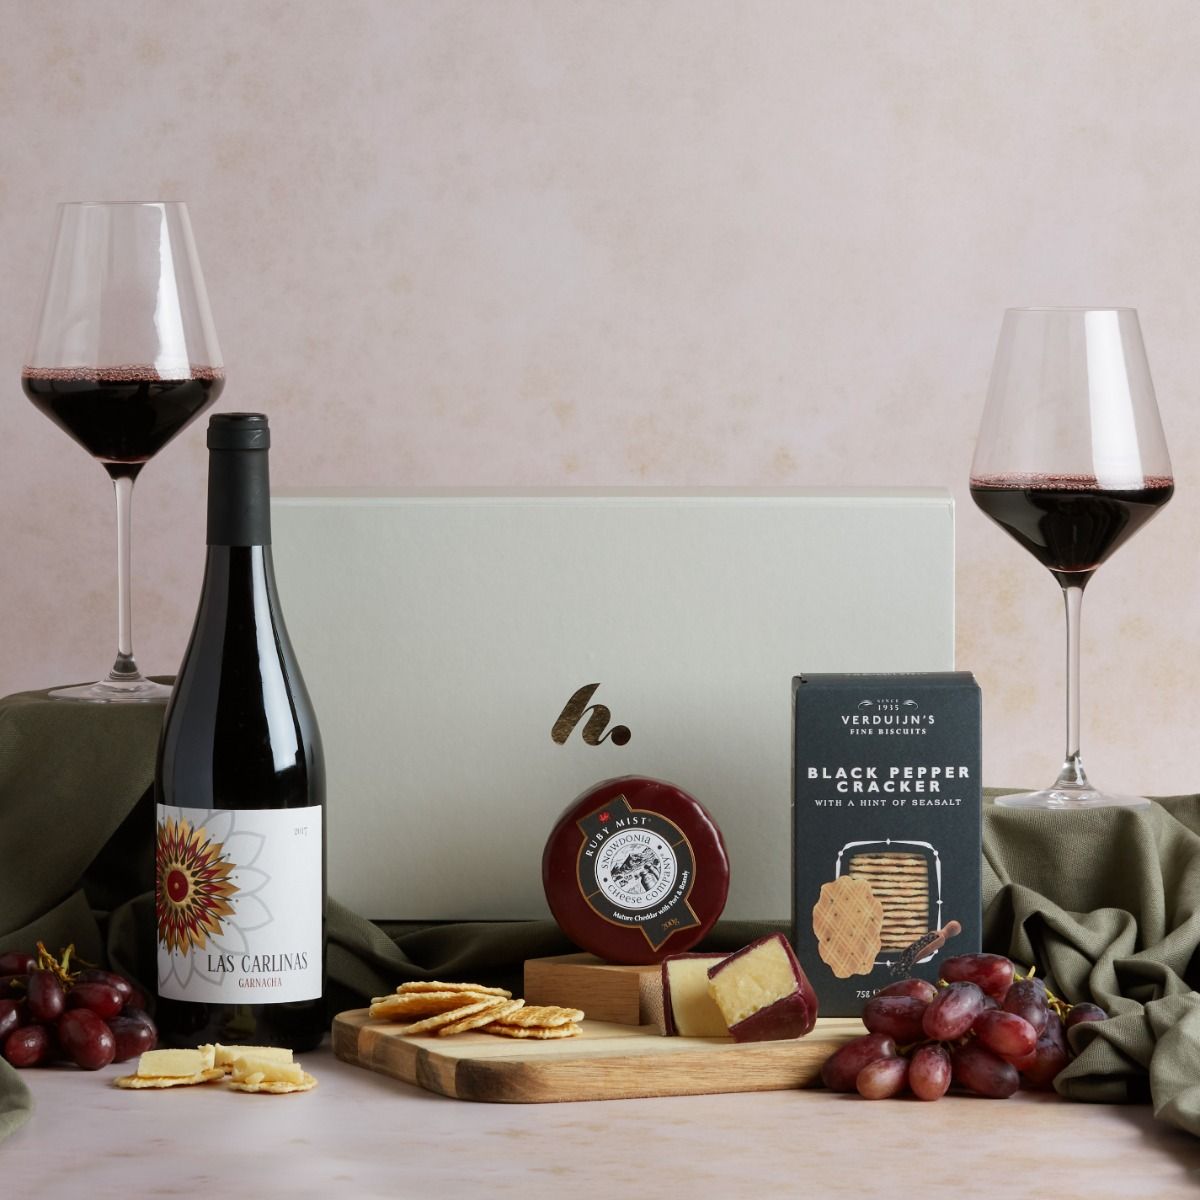 Classic Wine and Cheese Hamper with contents on display, including red wine